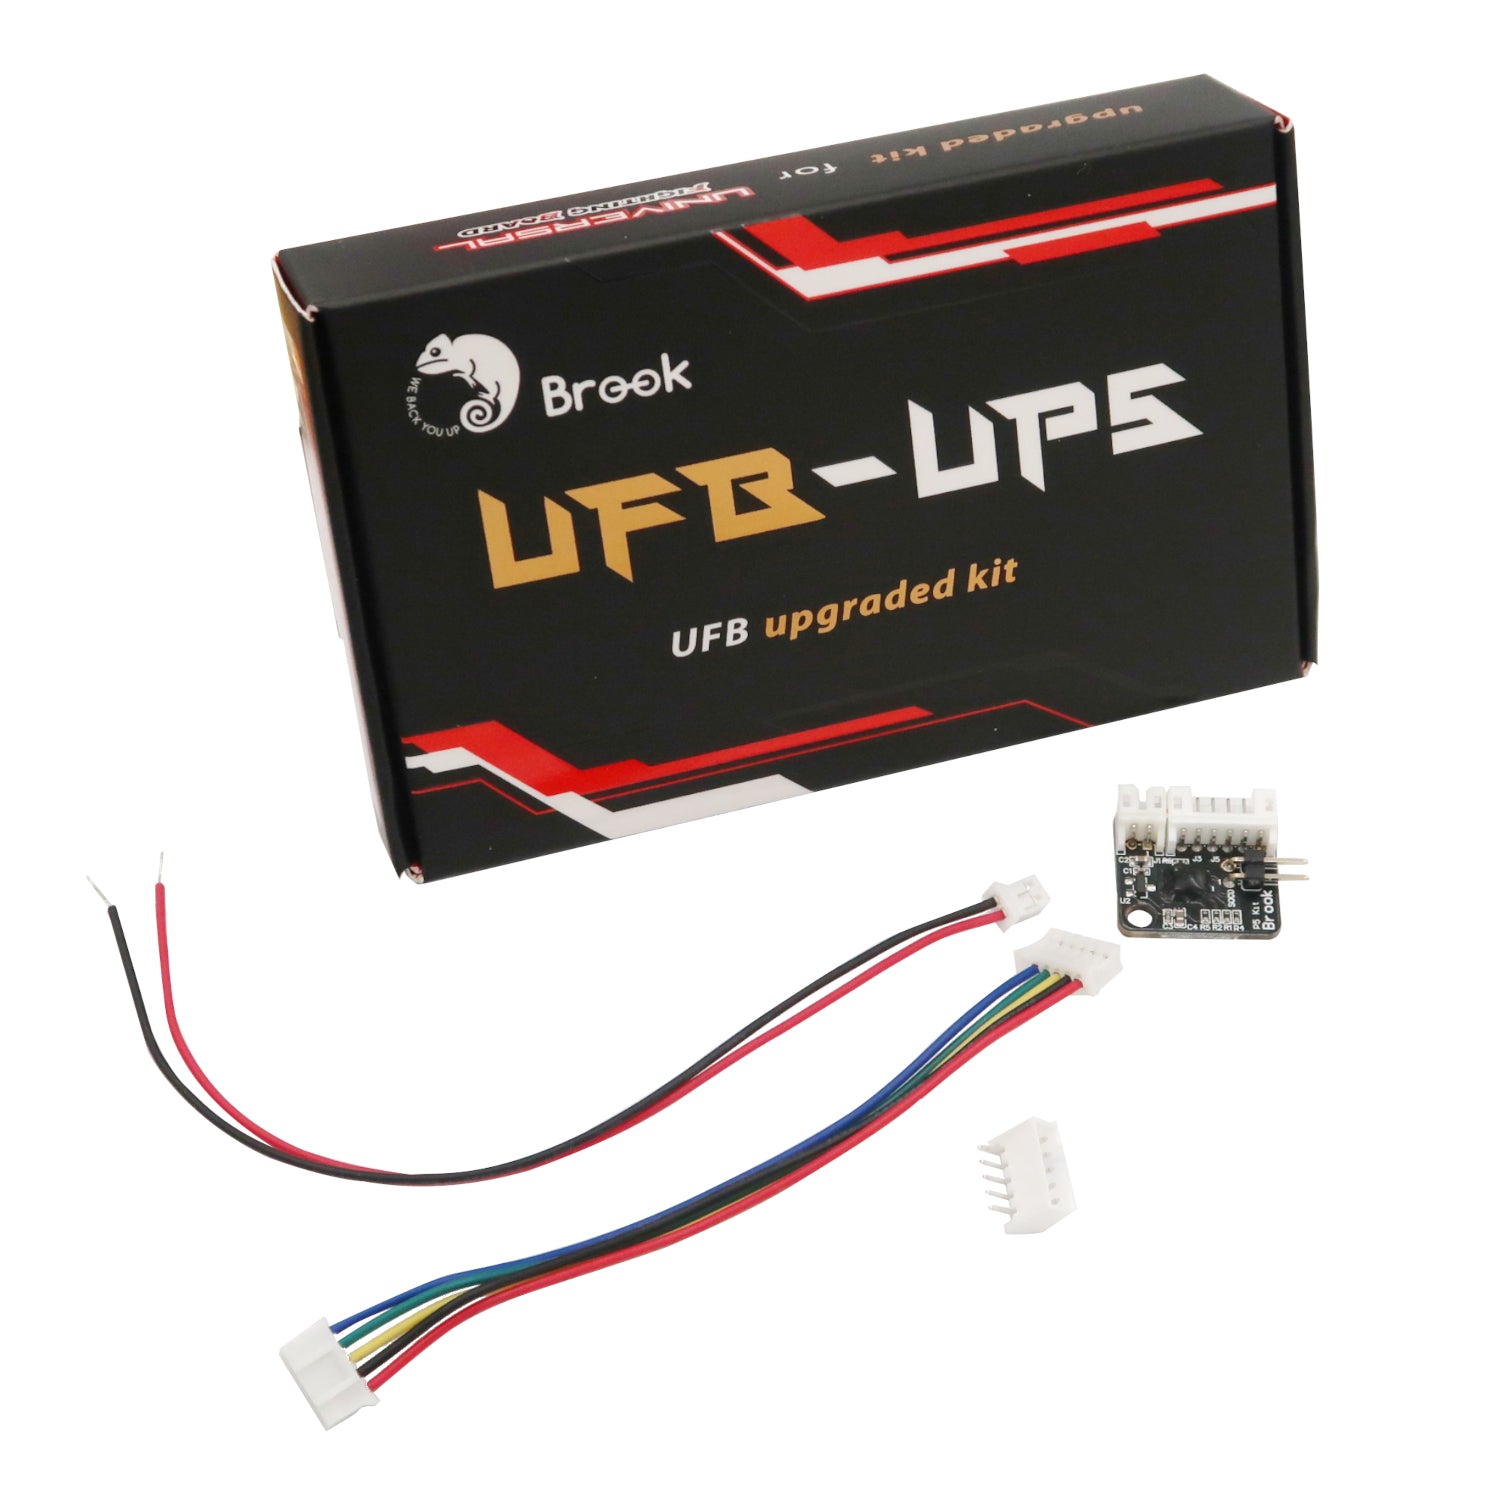 Brook UFB-UP5 Universal Fighting Board Upgrade Kit for PS5 (EMM0009609